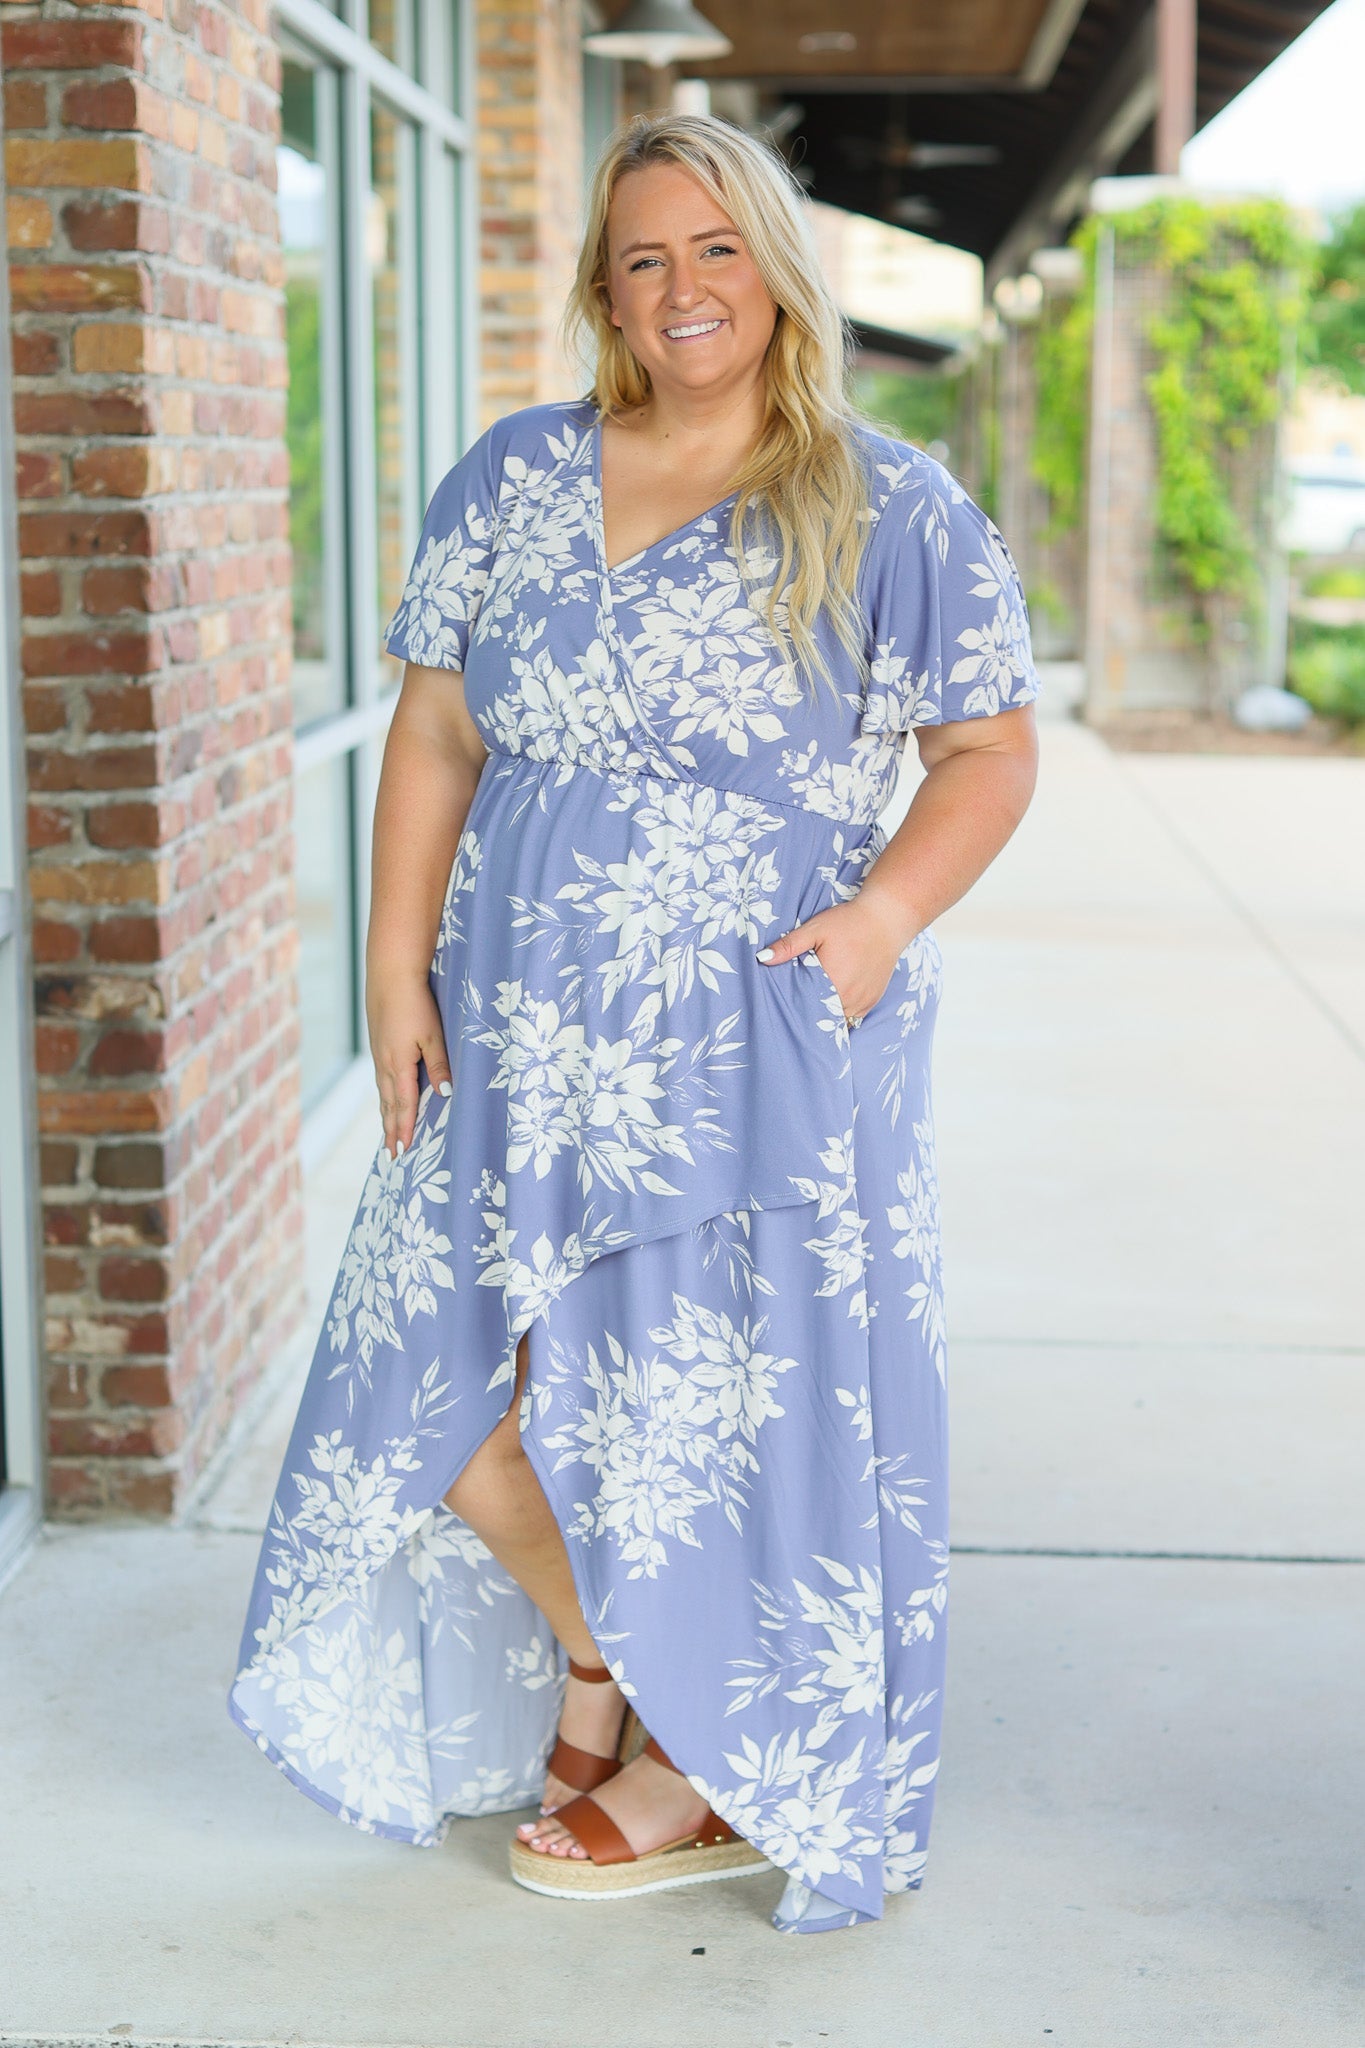 IN STOCK Harley High-Lo Dress - Periwinkle Floral